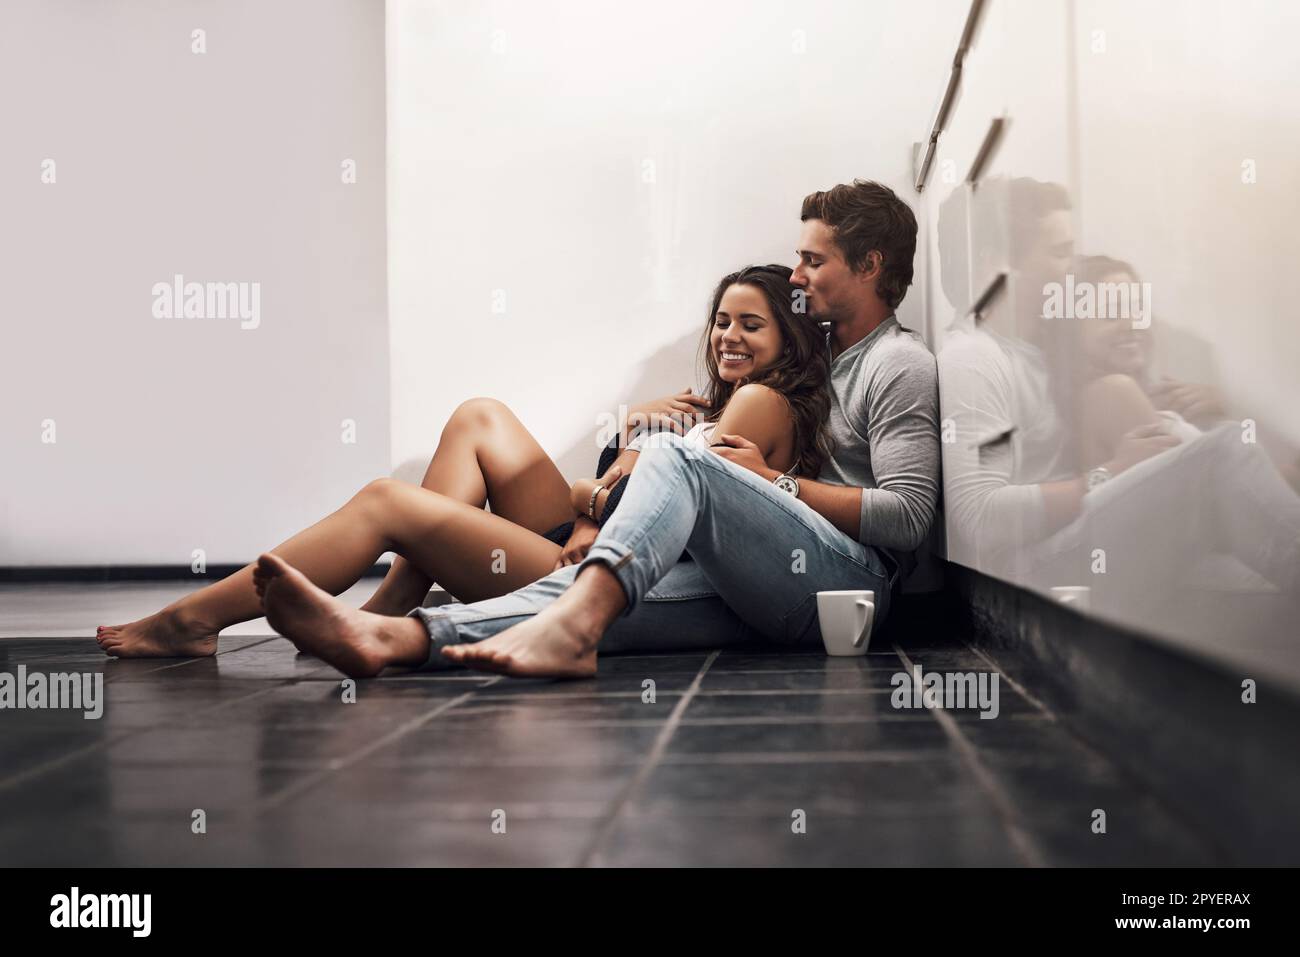 Romance turns a house into paradise. an affectionate young couple sitting on the kitchen floor. Stock Photo